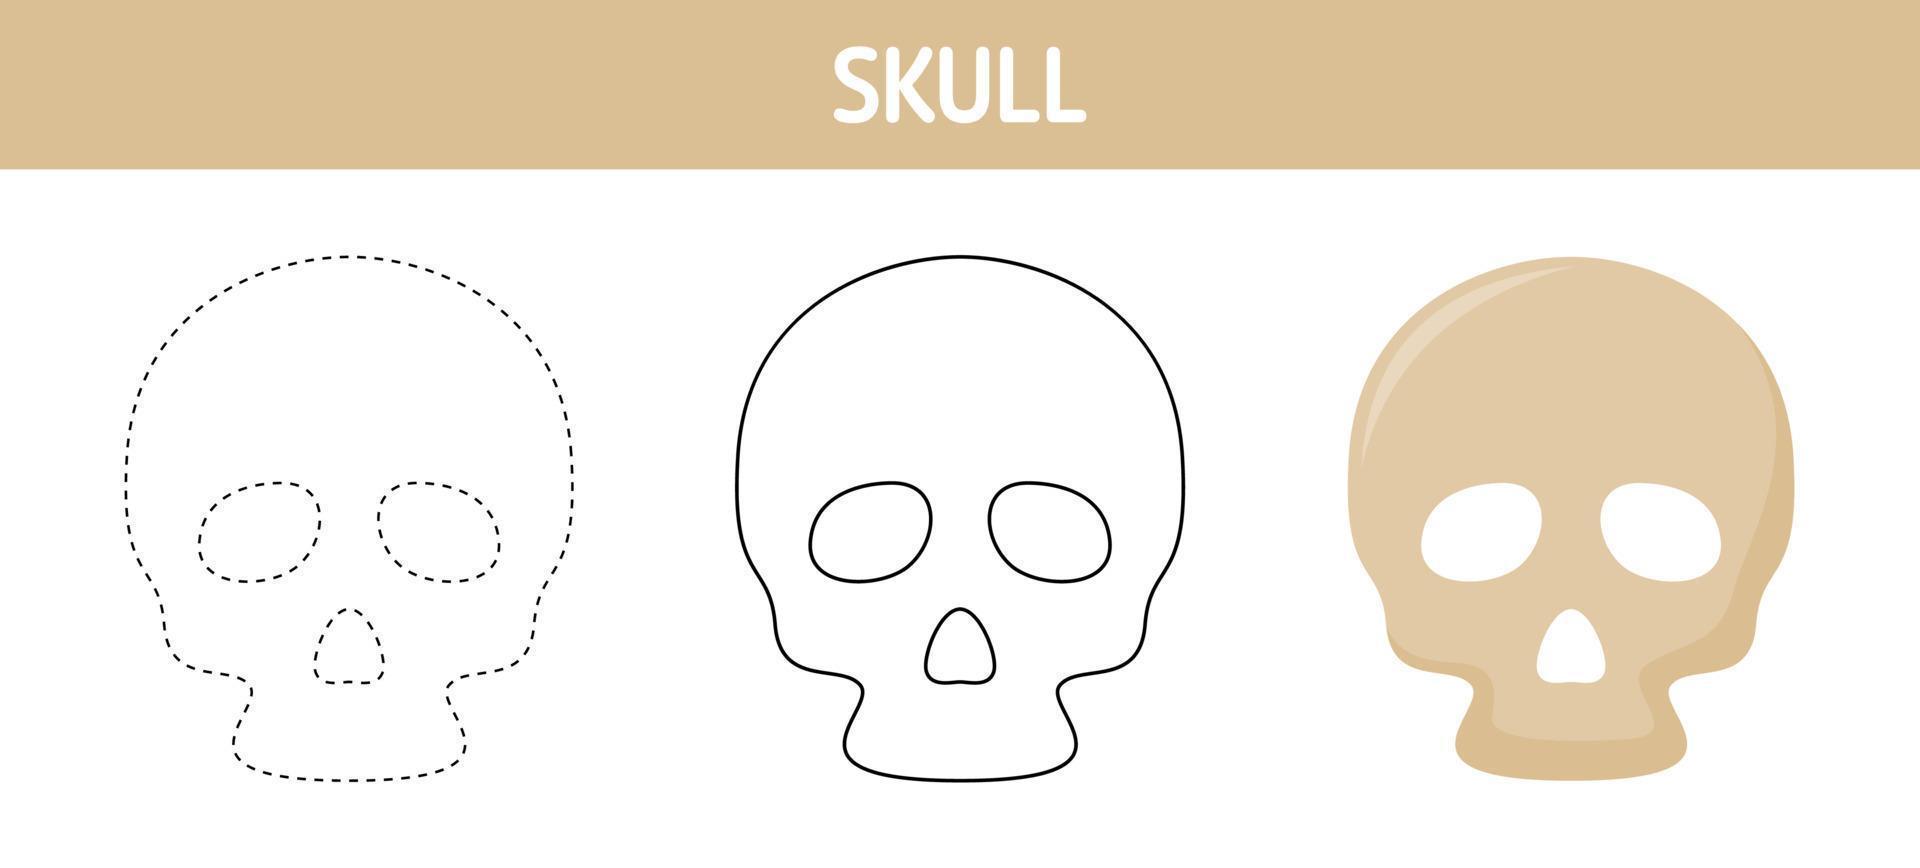 Skull tracing and coloring worksheet for kids vector